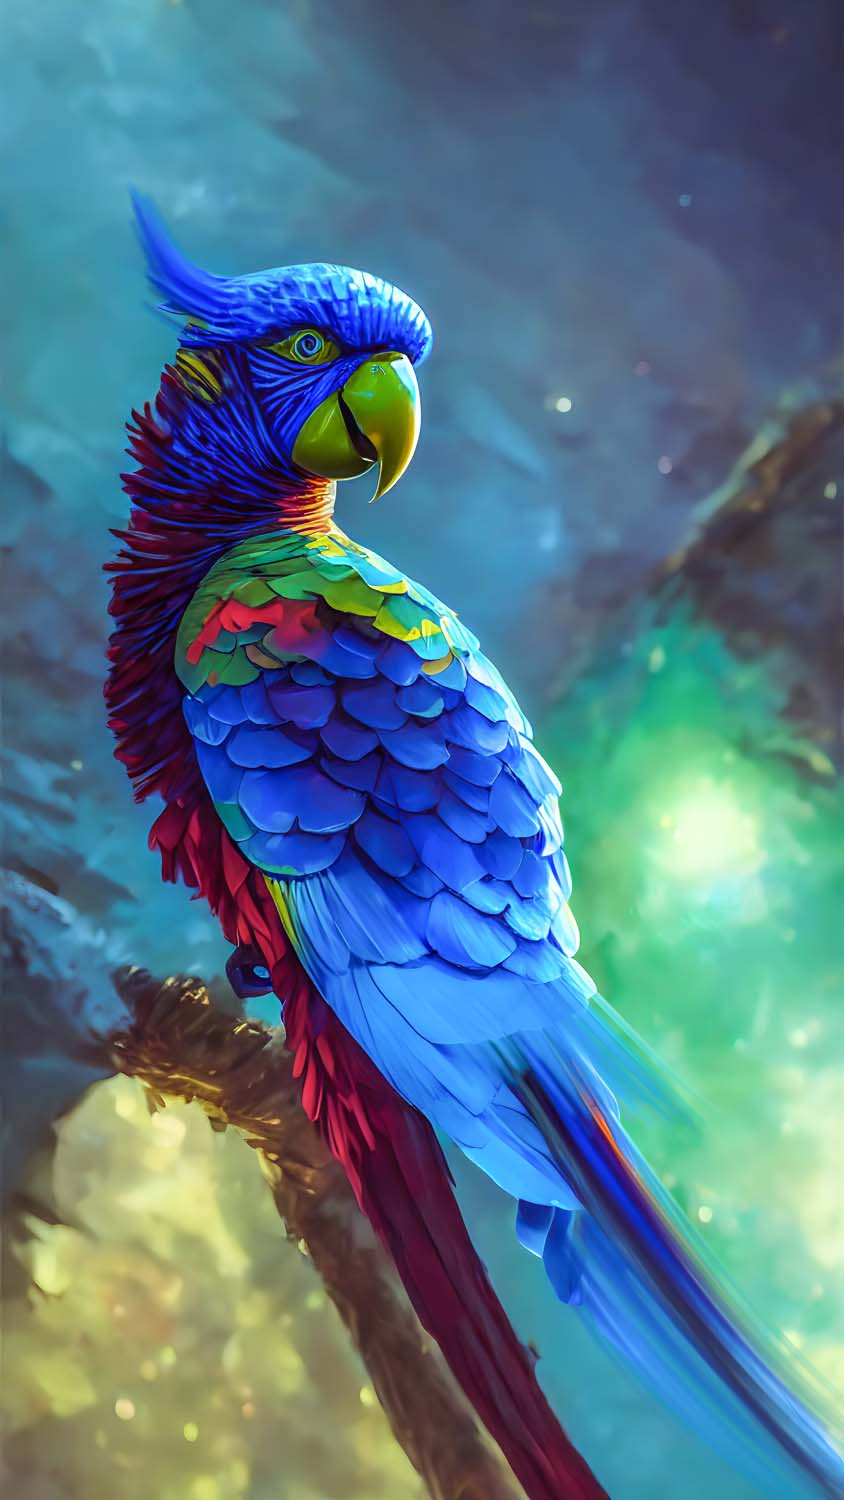 Hyacinth Macaw Parrot IPhone Wallpaper HD  IPhone Wallpapers